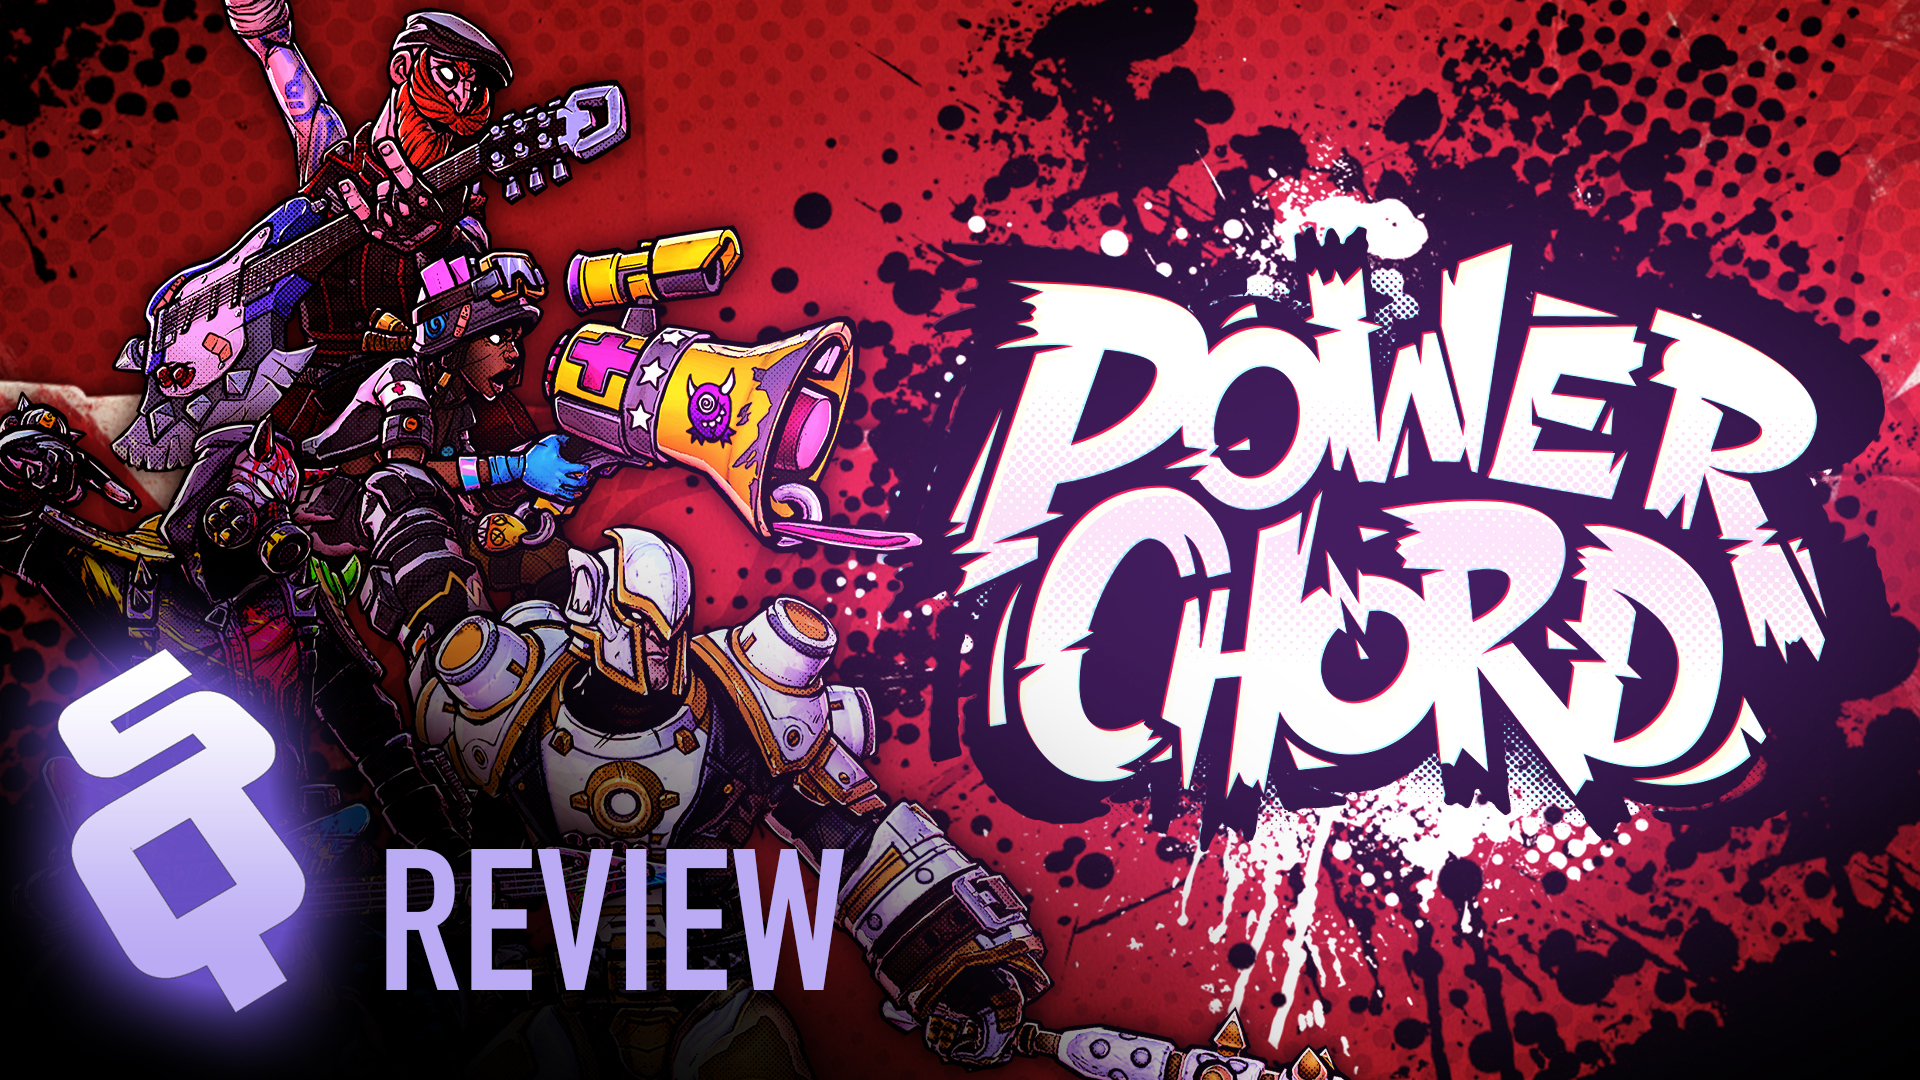 Power Chord review